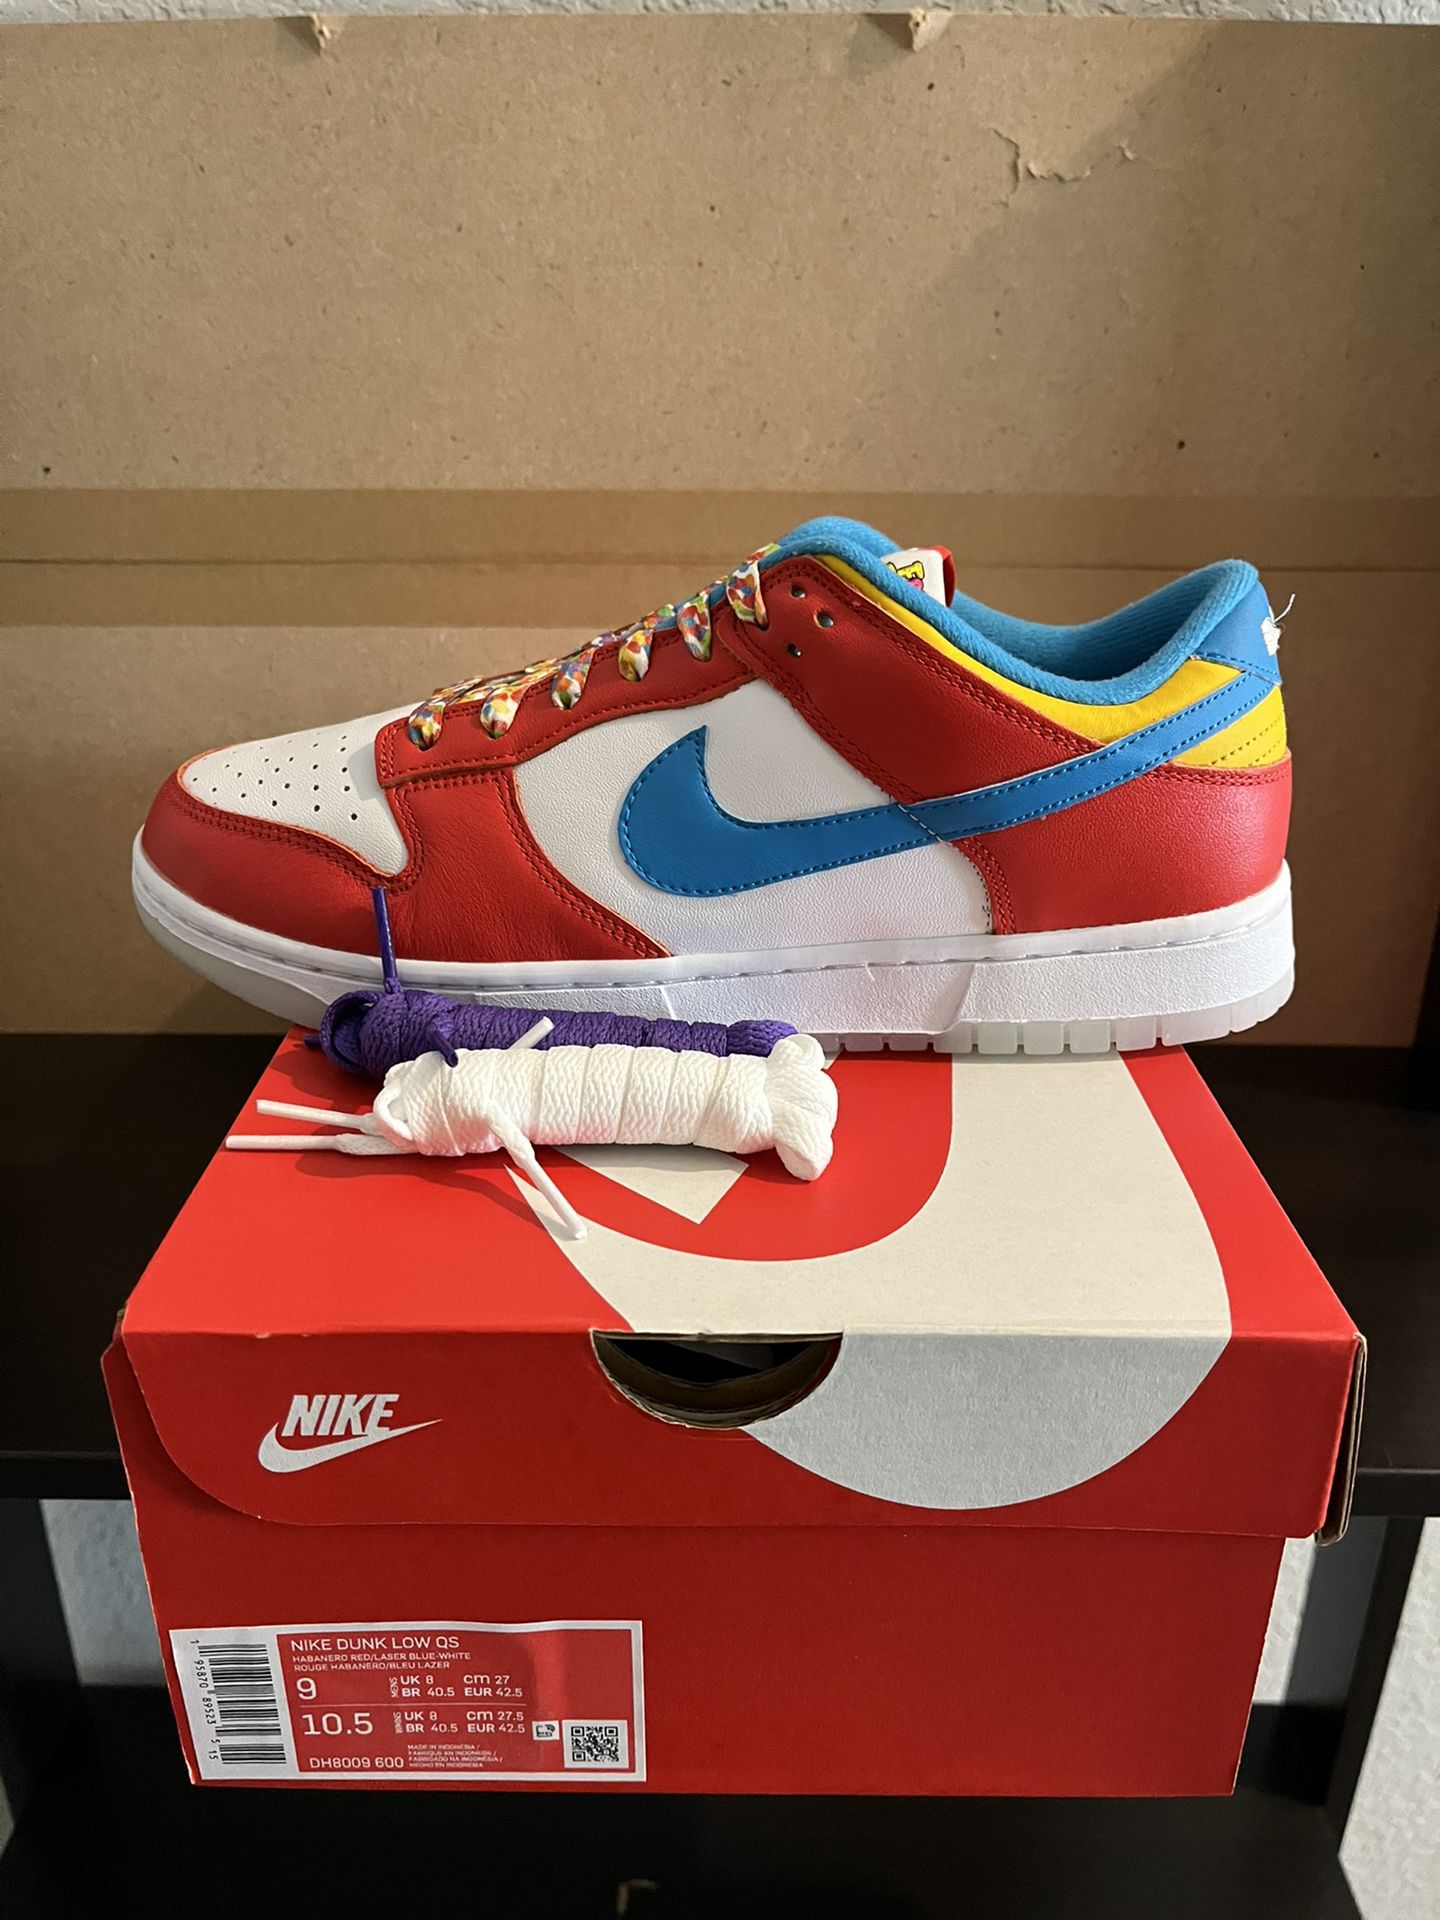 DS Dunk Low Lebron James Fruity Pebbles Men for Sale in Katy, TX - OfferUp